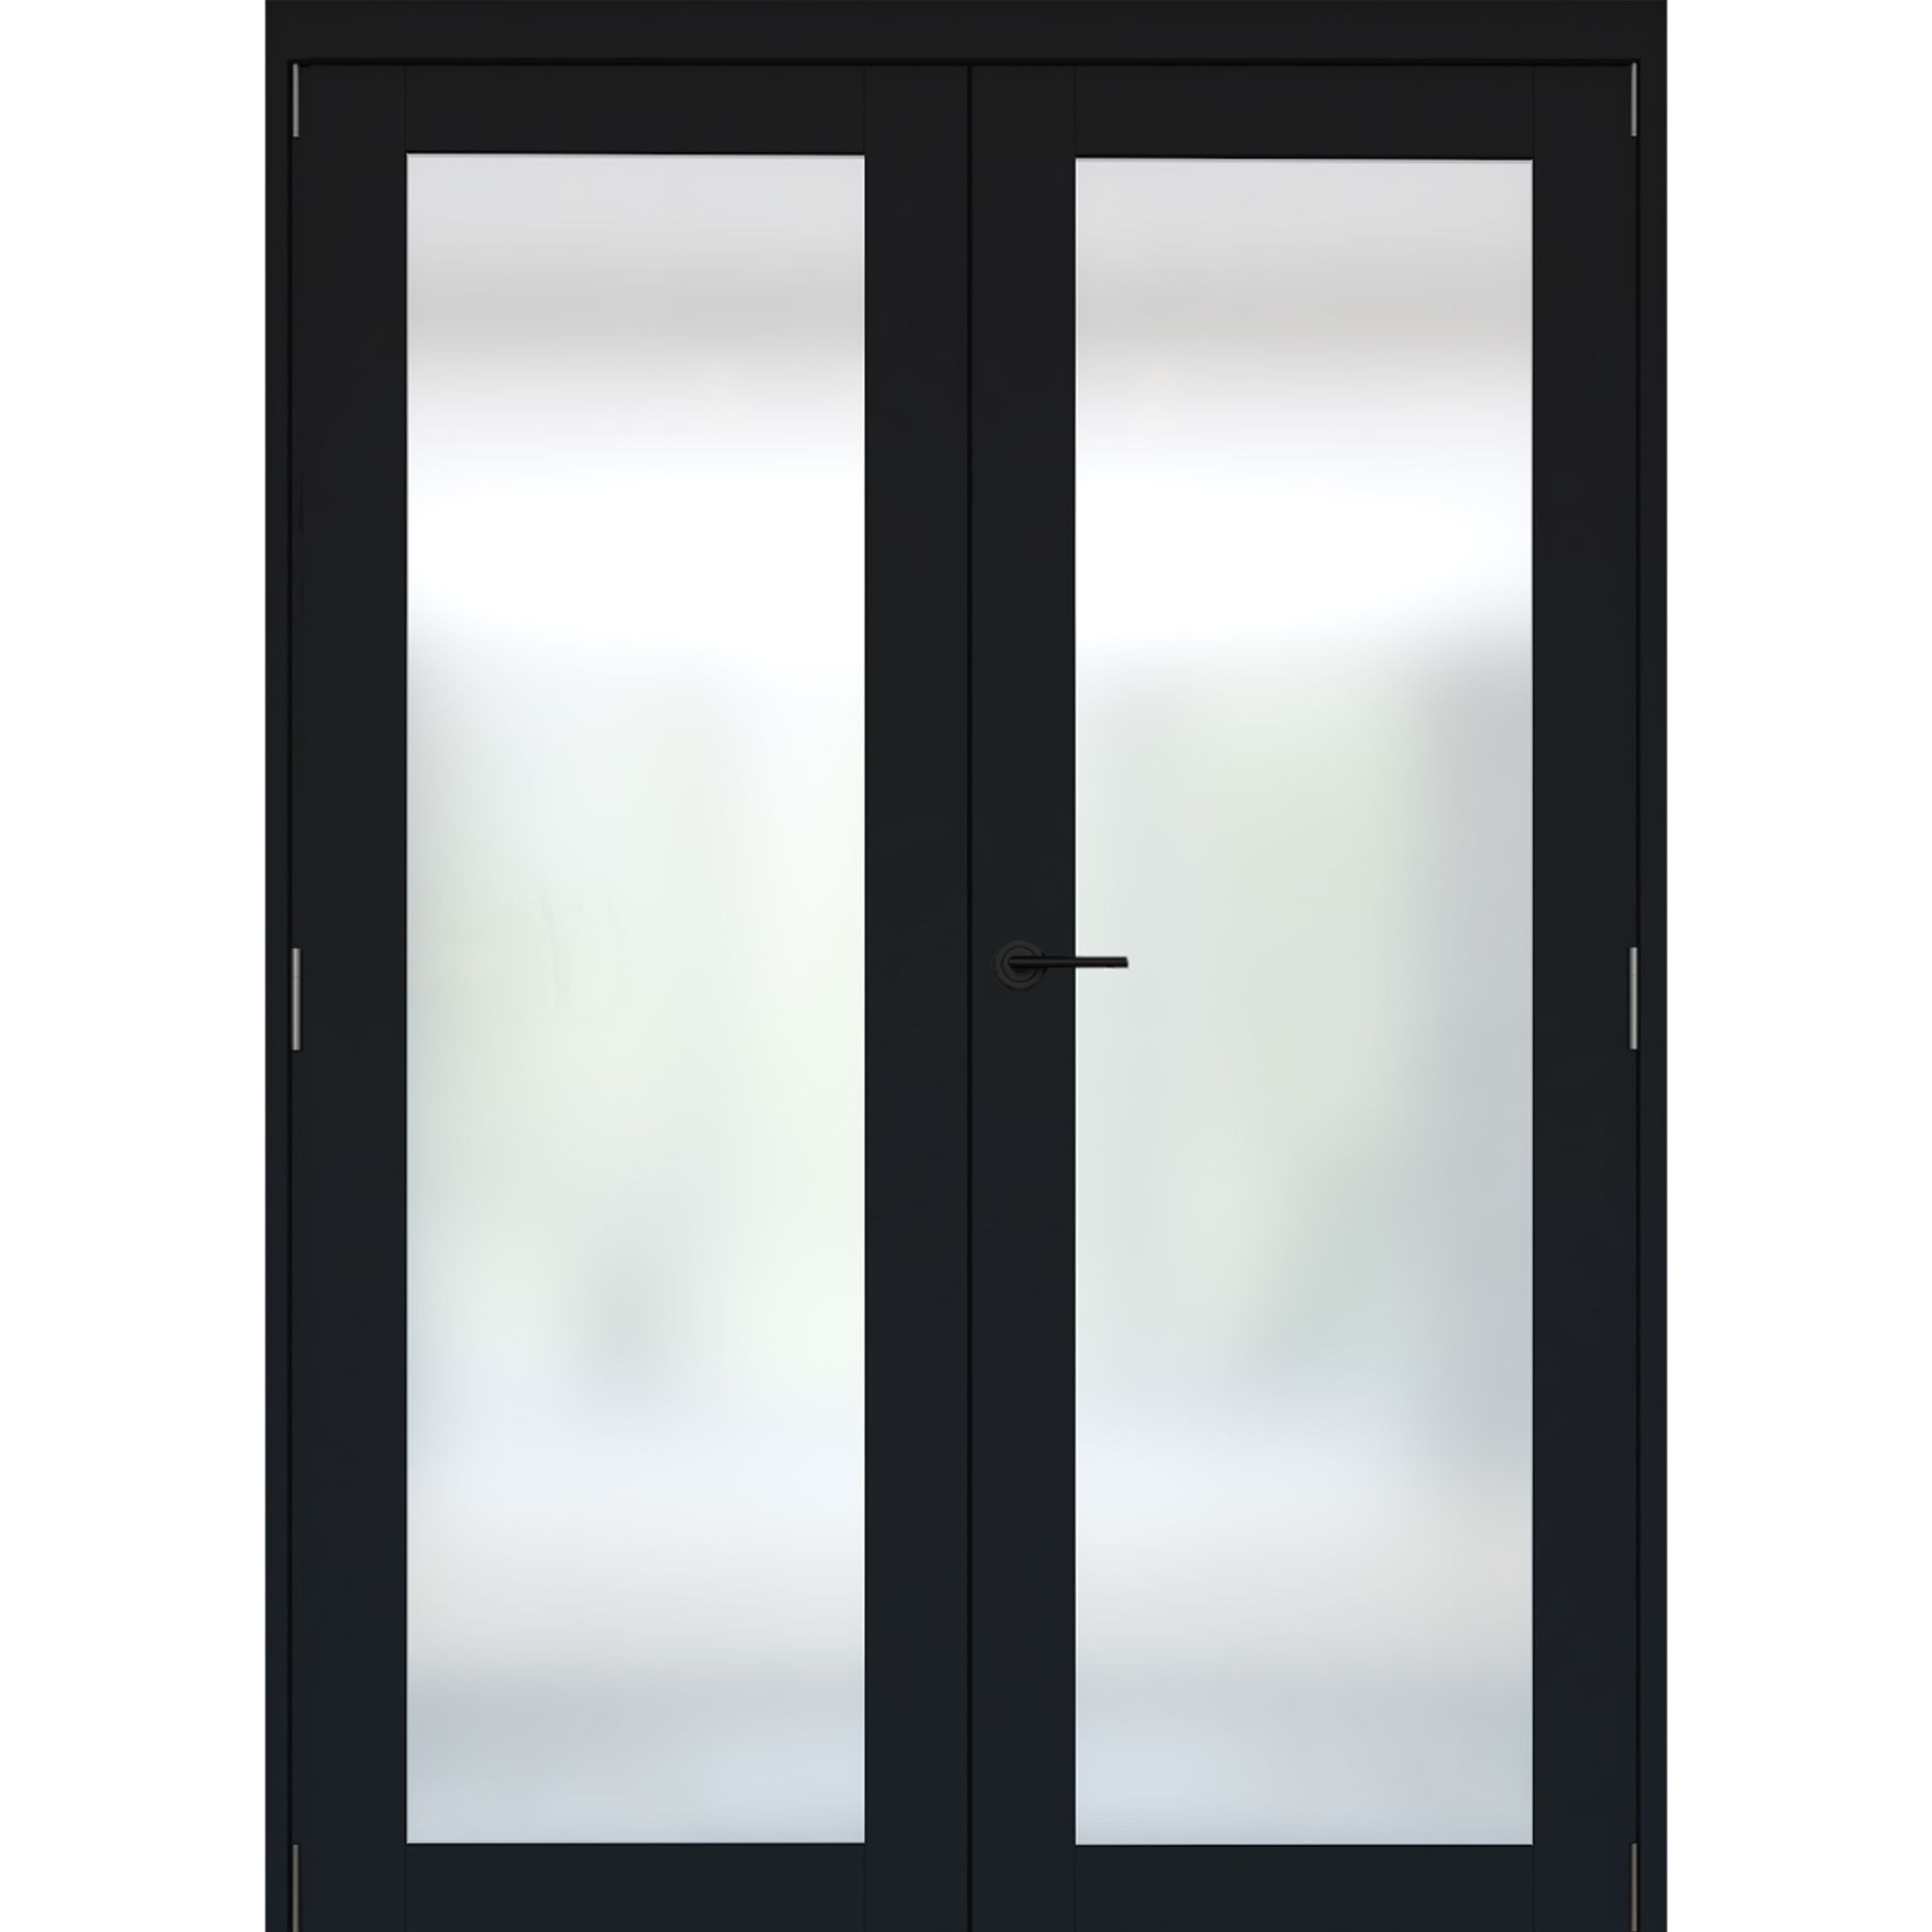 1 panel 1 Lite Frosted Fully glazed Timber Black Internal French door set 2017mm x 133mm x 1597mm - Fully Finished